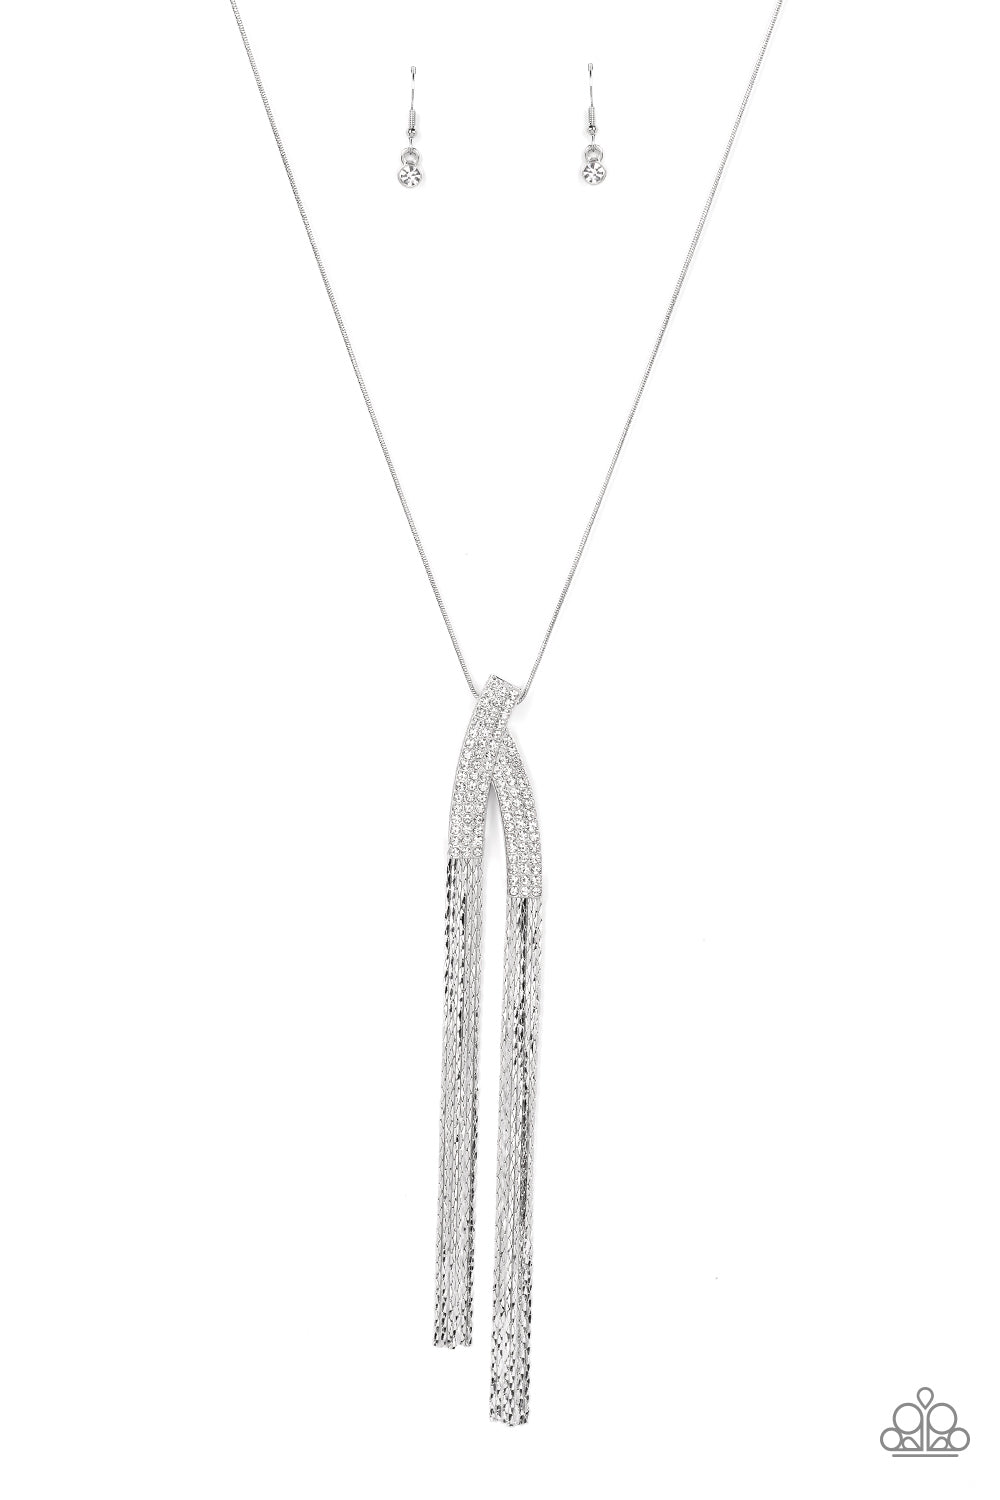 Out of the SWAY White Rhinestone Necklace - Paparazzi Accessories- lightbox - CarasShop.com - $5 Jewelry by Cara Jewels